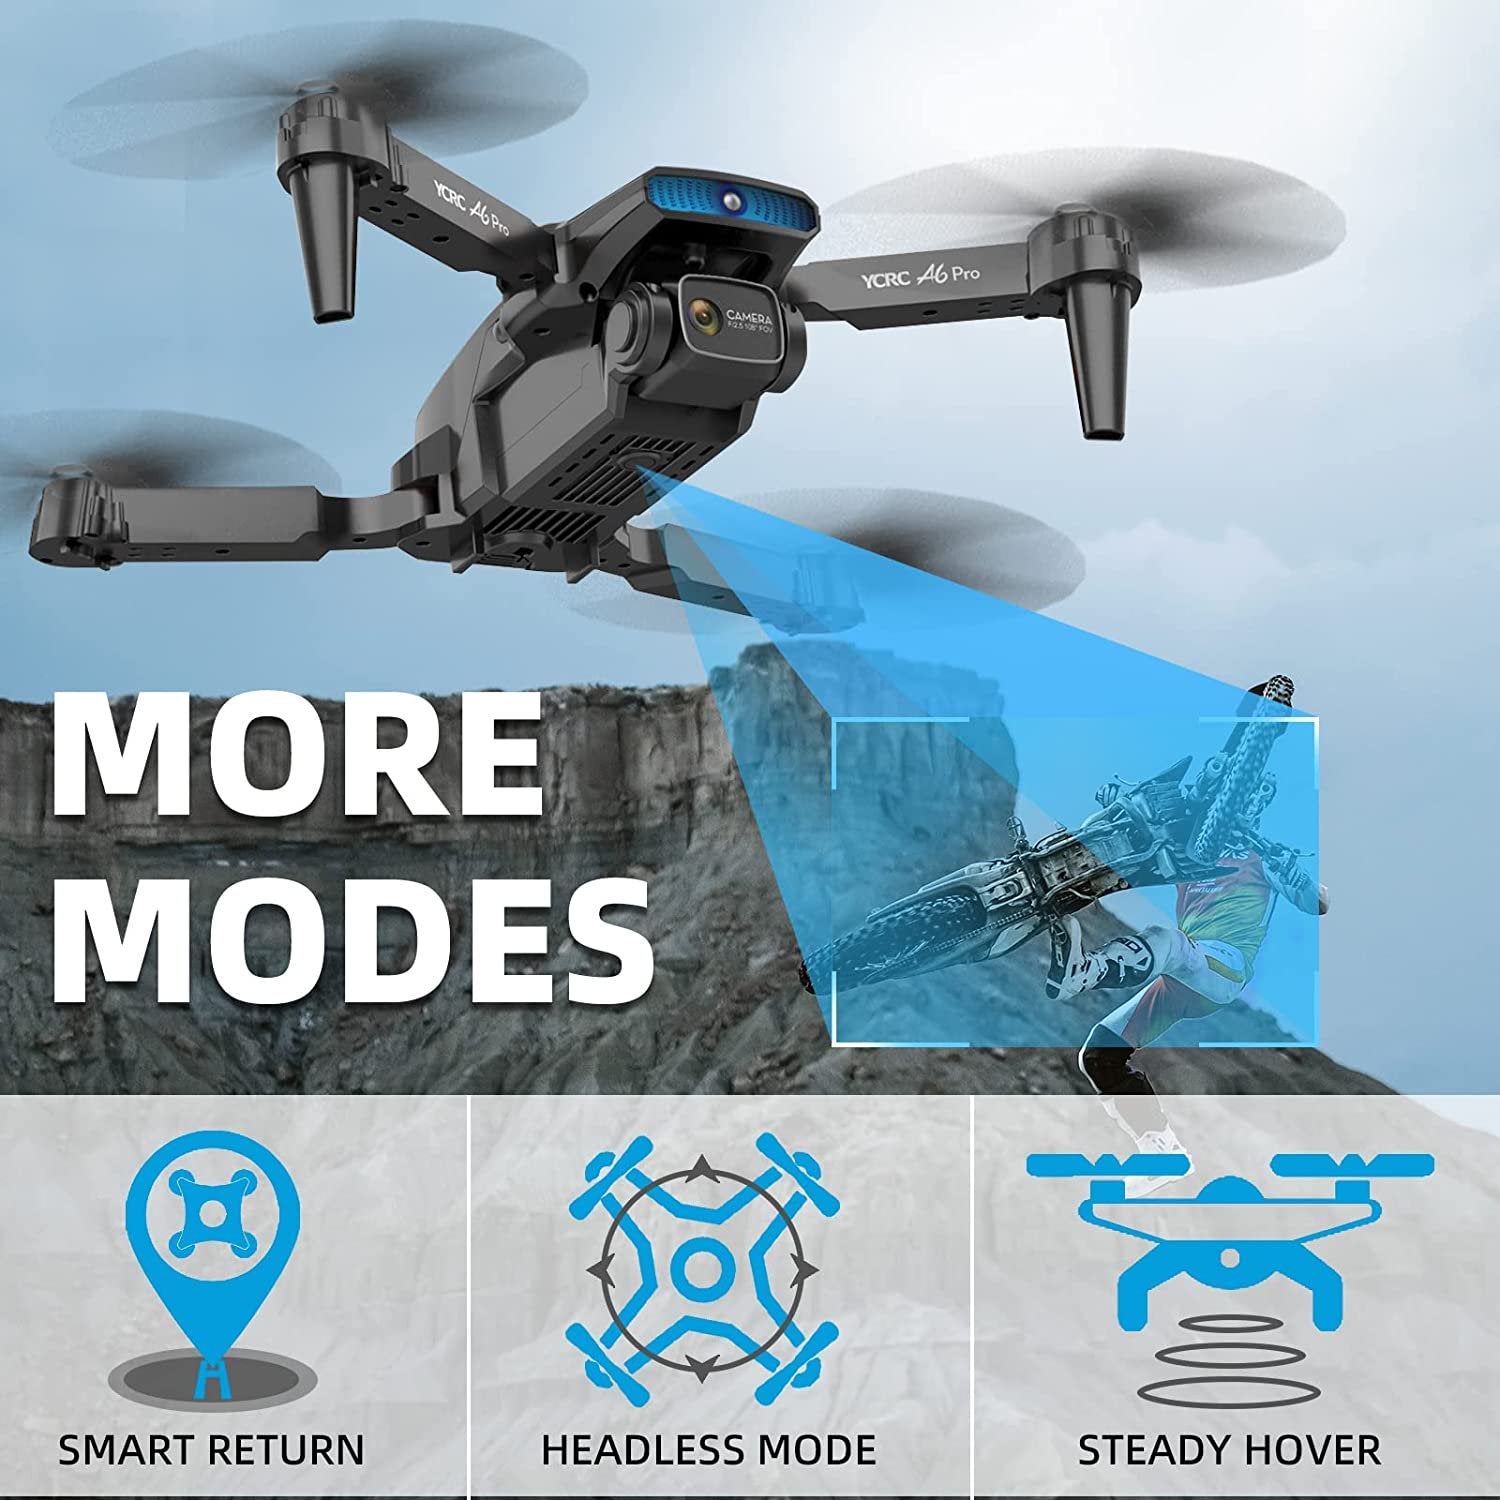 WiFi FPV RC Drone with 4K HD Camera, 40 Mins Flight Time, Foldable Drone 